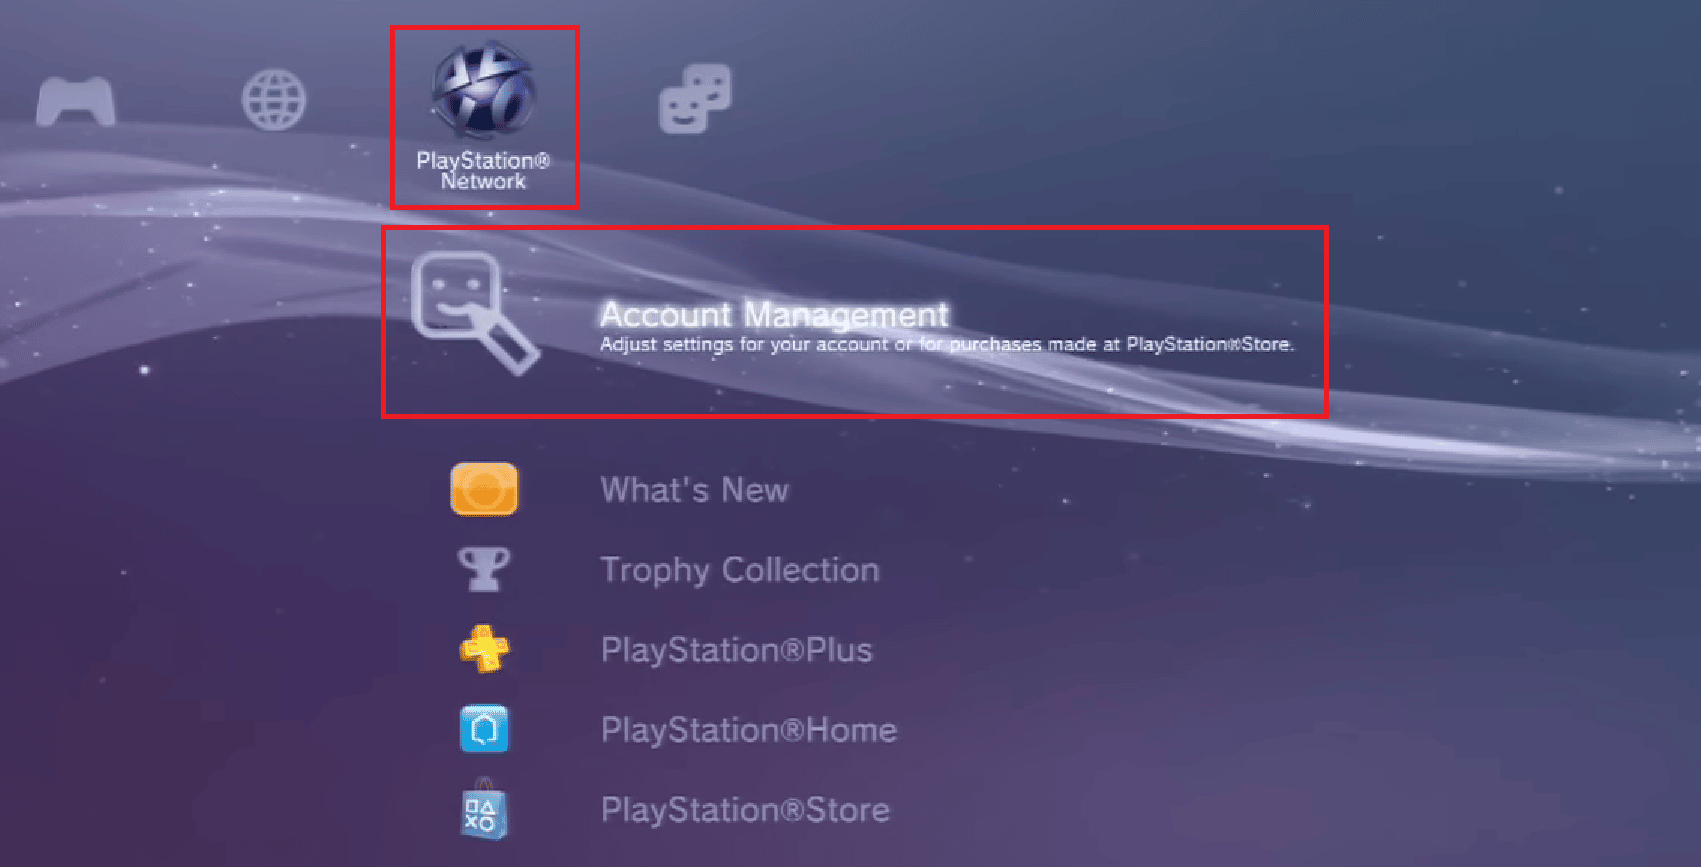 From your XrossMediaBar (XMB) screen, select PlayStation Network - Select Account Management